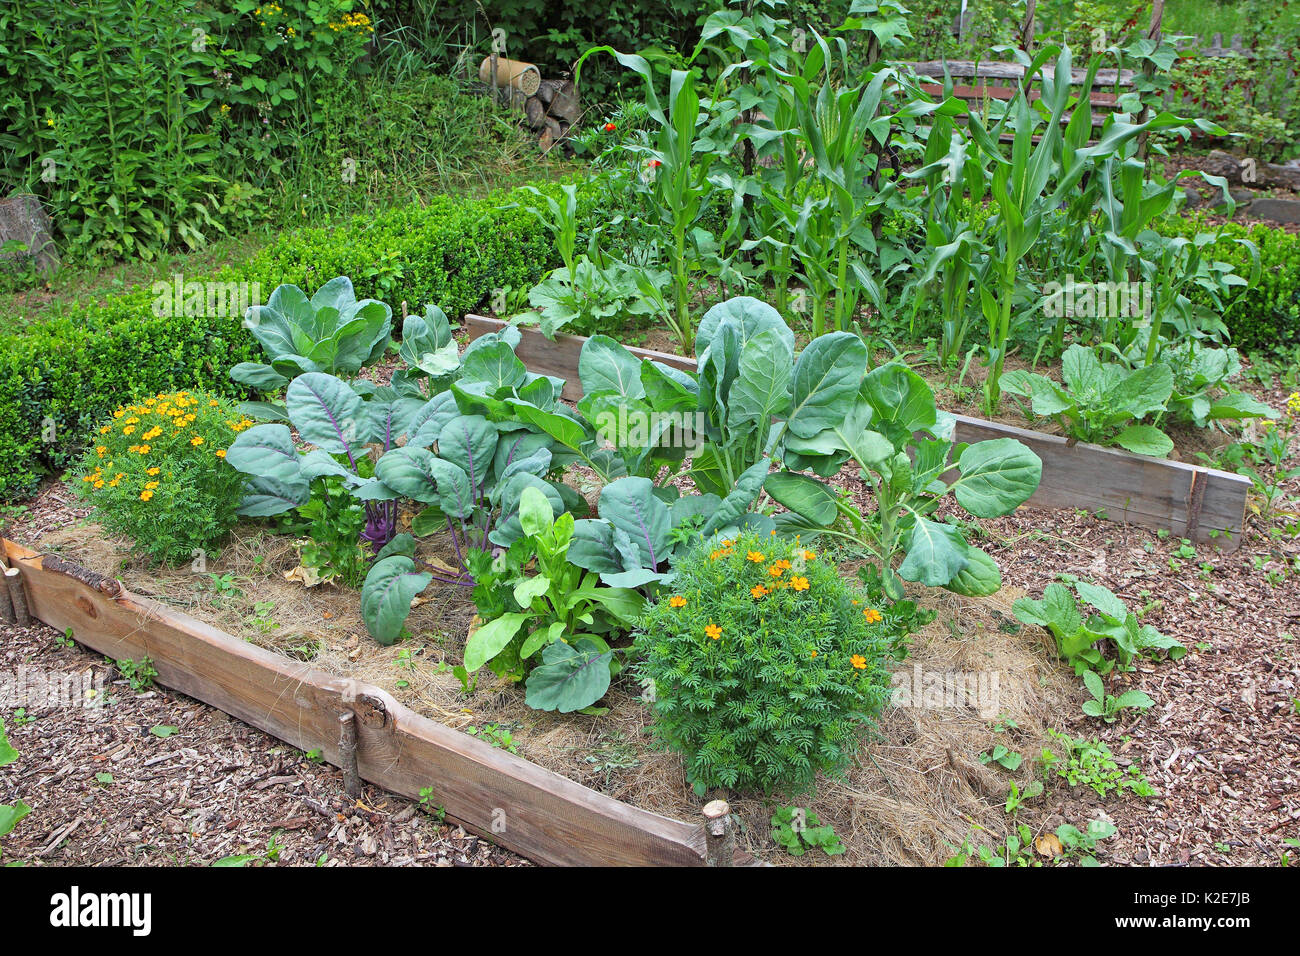 Farm garden with various typical plants such as cabbage, German turnip, Mexican tarragon, corn and runner beans, Germany Stock Photo